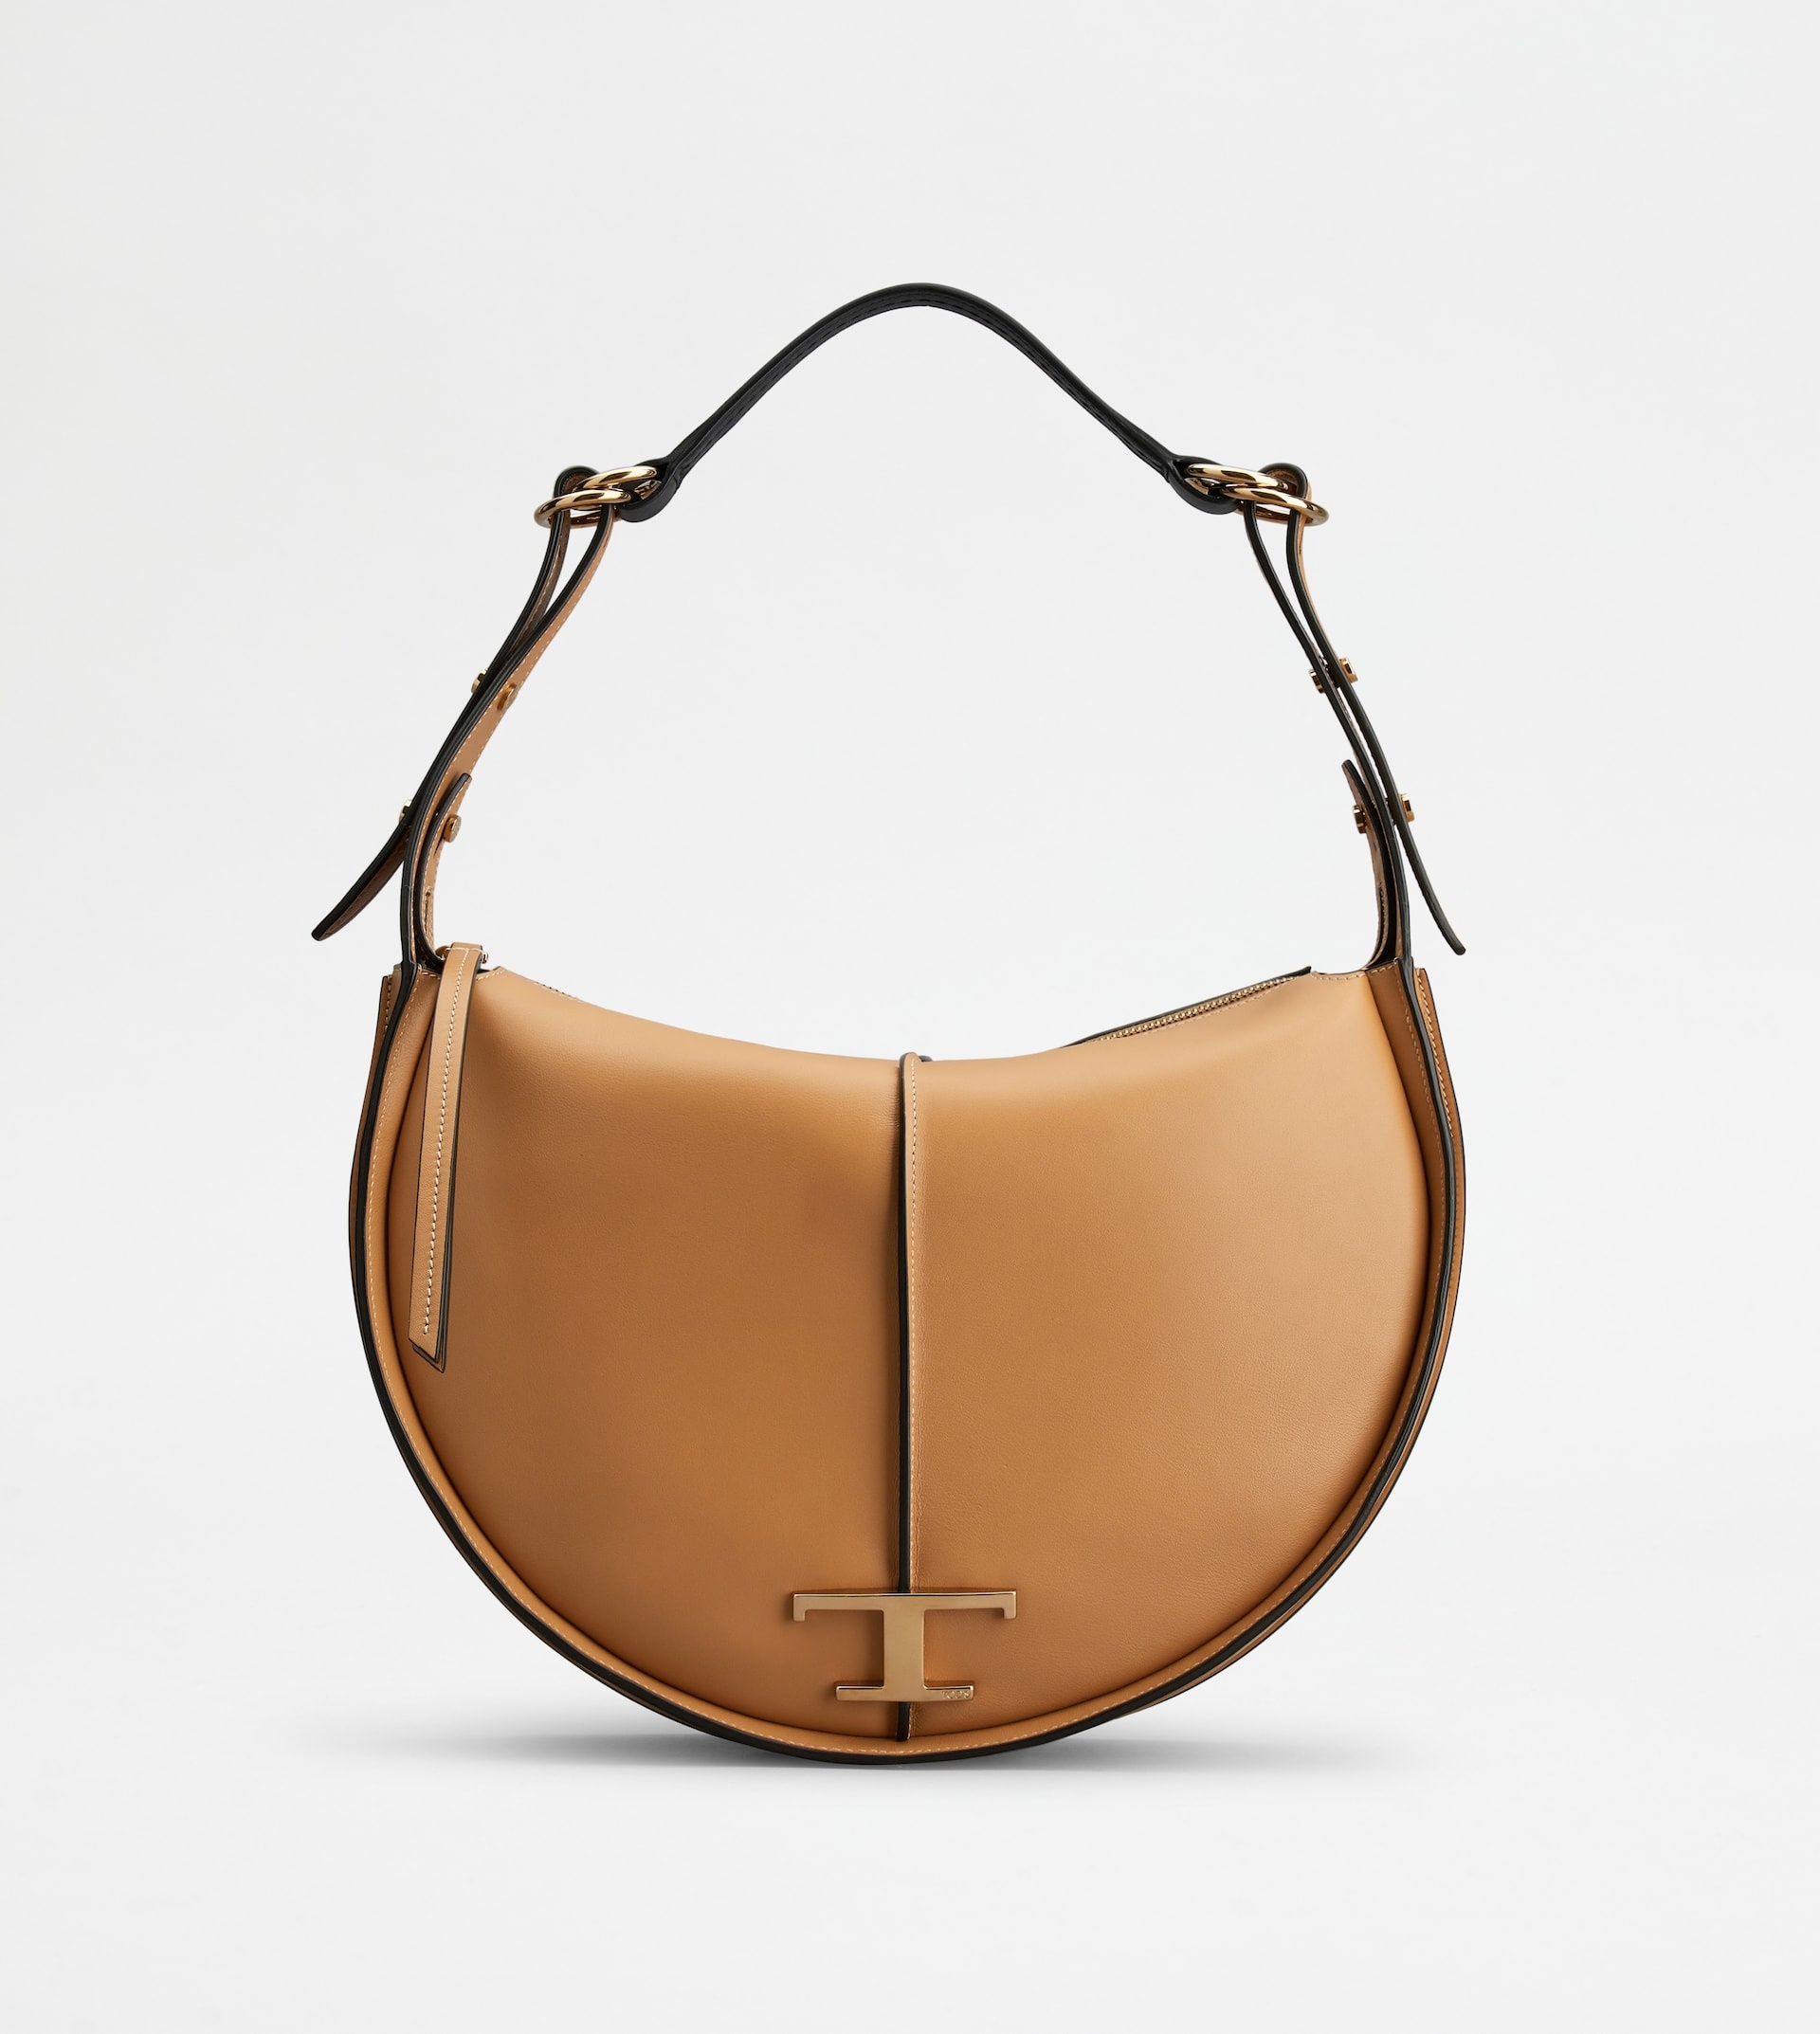 T TIMELESS HOBO BAG IN LEATHER MEDIUM - BROWN - 1